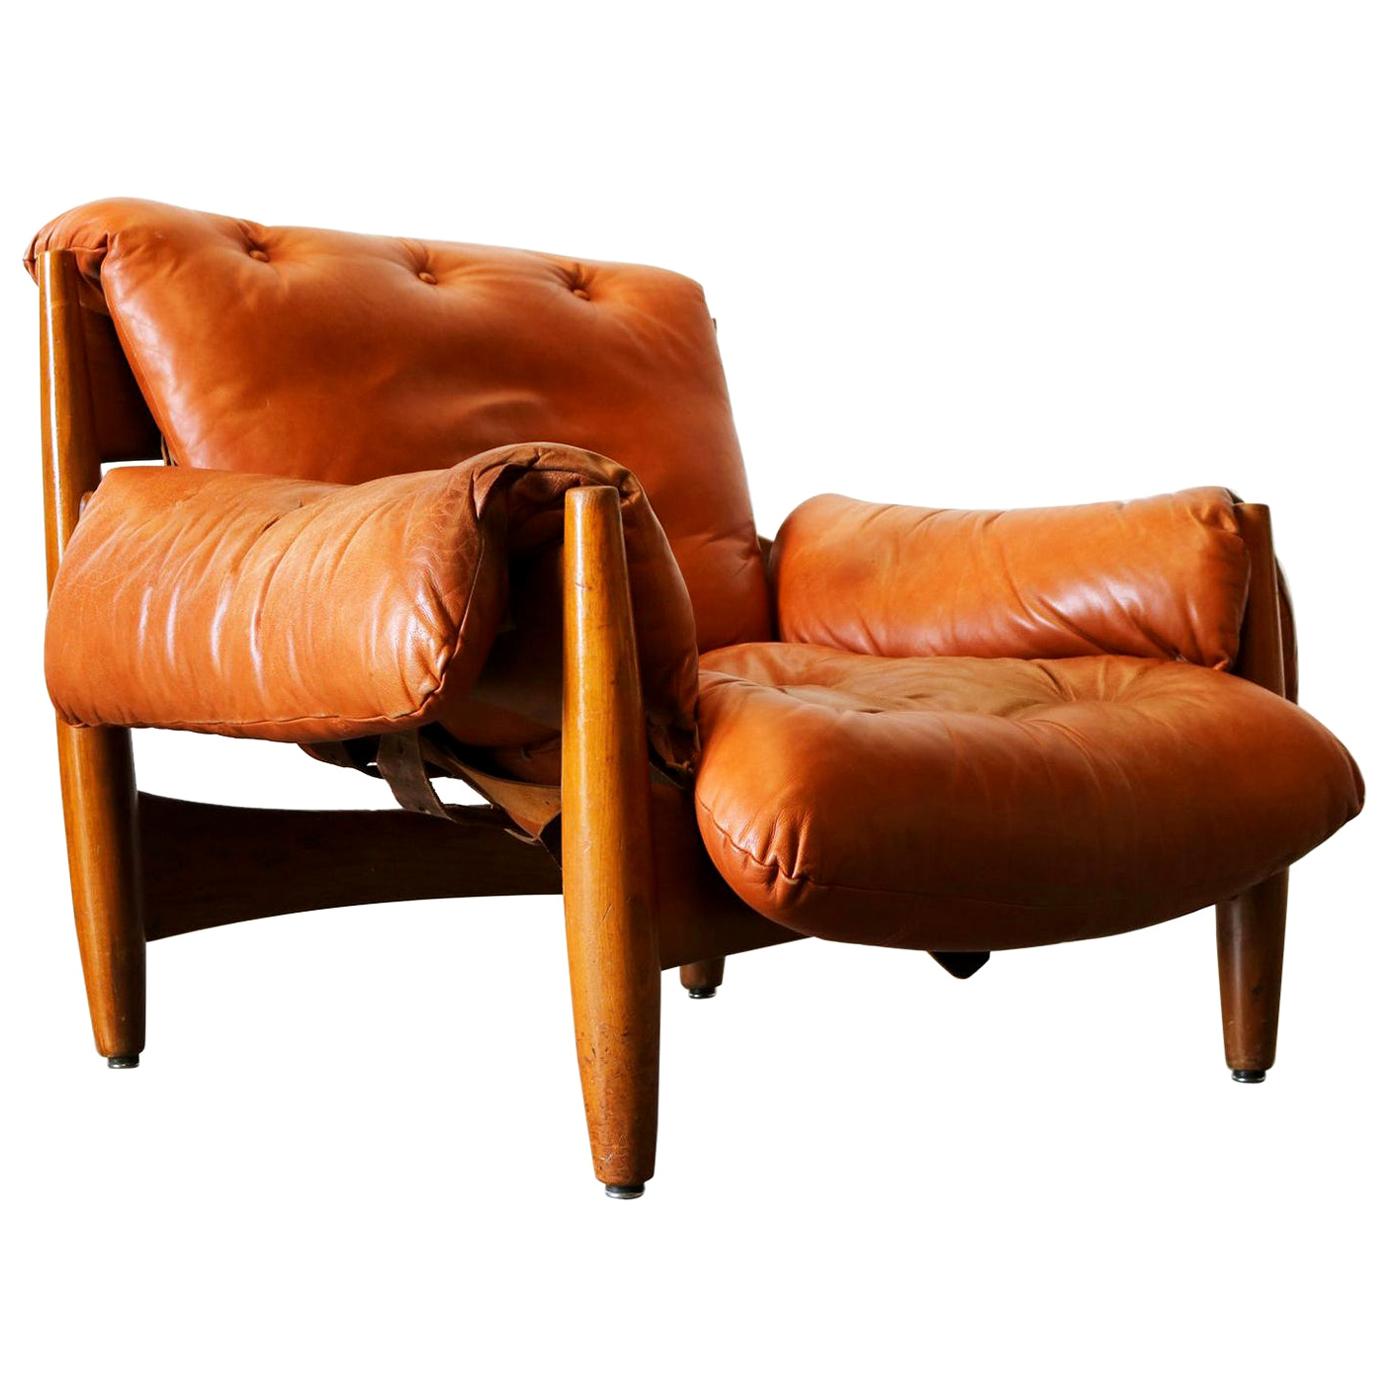 2 "Sheriff" Armchairs by Sergio Rodriguez from I.S.A. Bergamo Mid-Century Modern